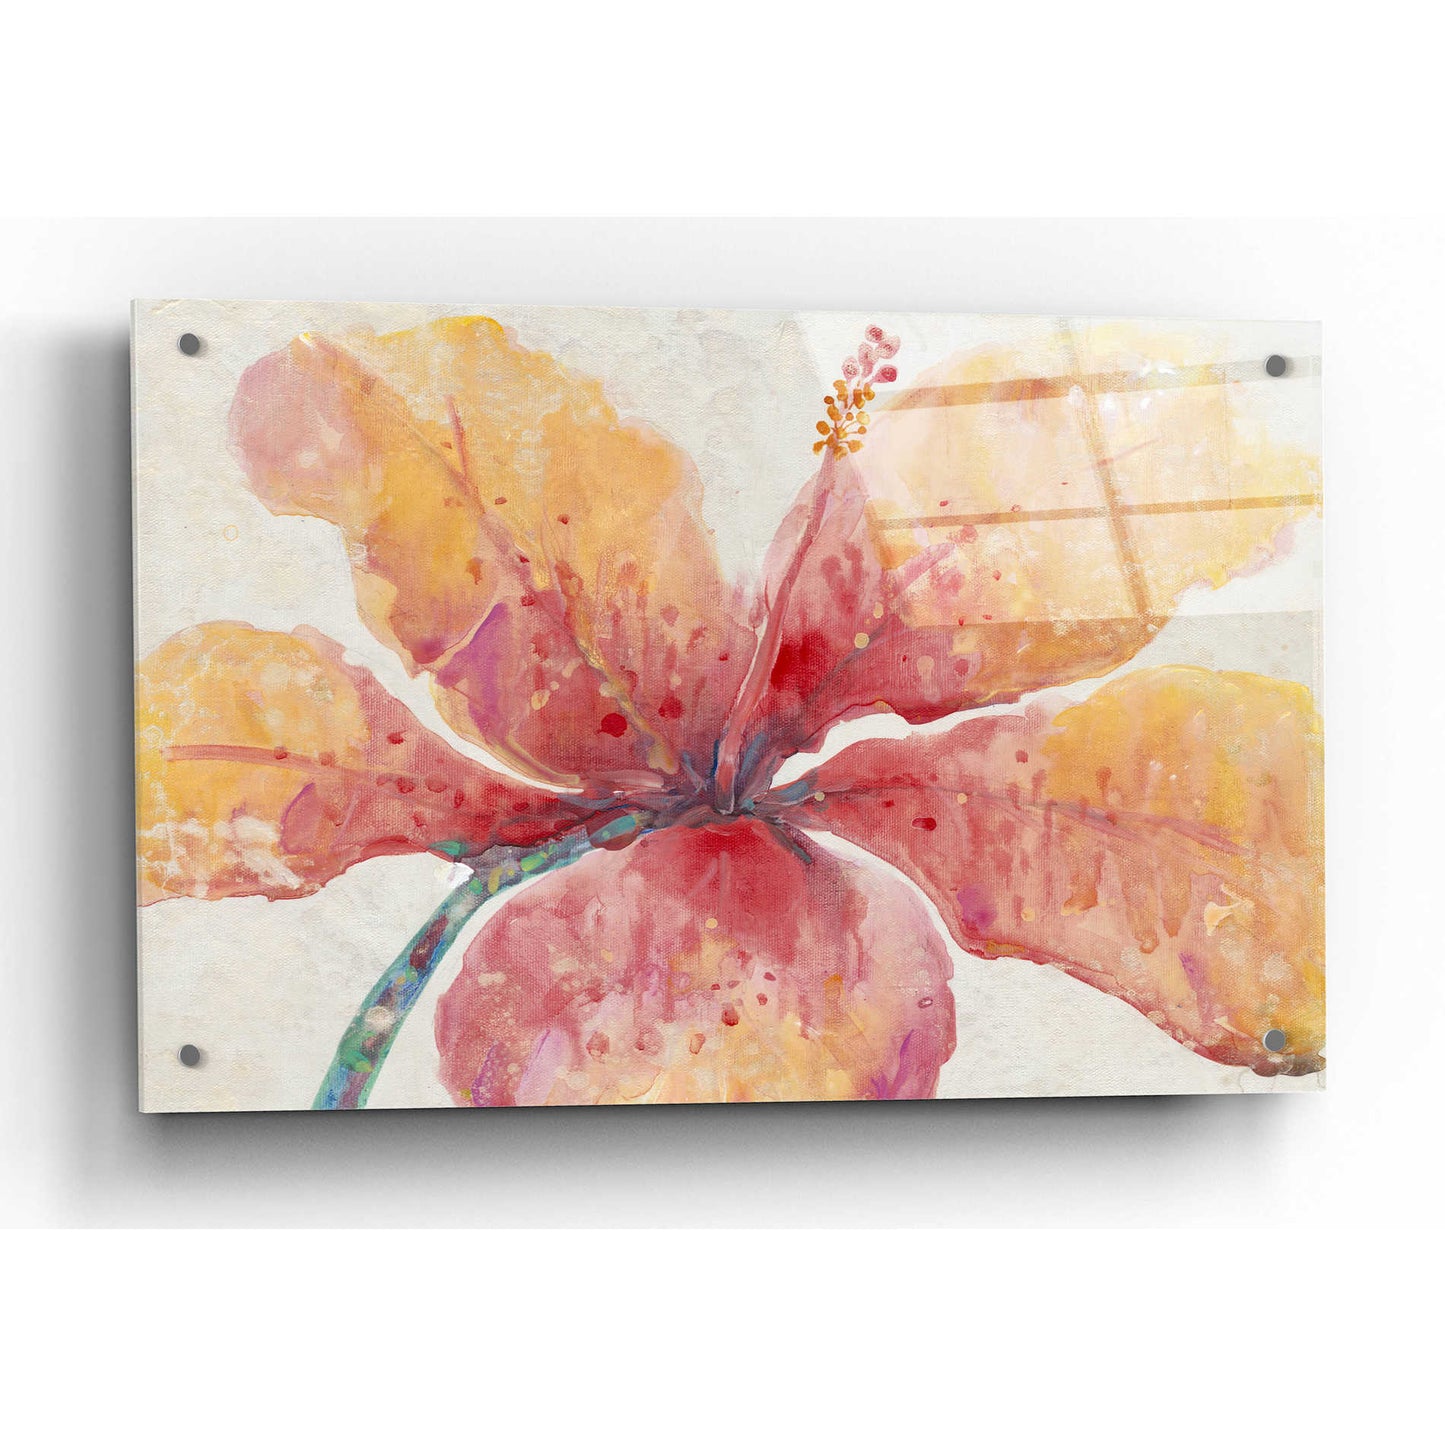 Epic Art 'Blooming Hibiscus' by Tim O'Toole, Acrylic Glass Wall Art,36x24